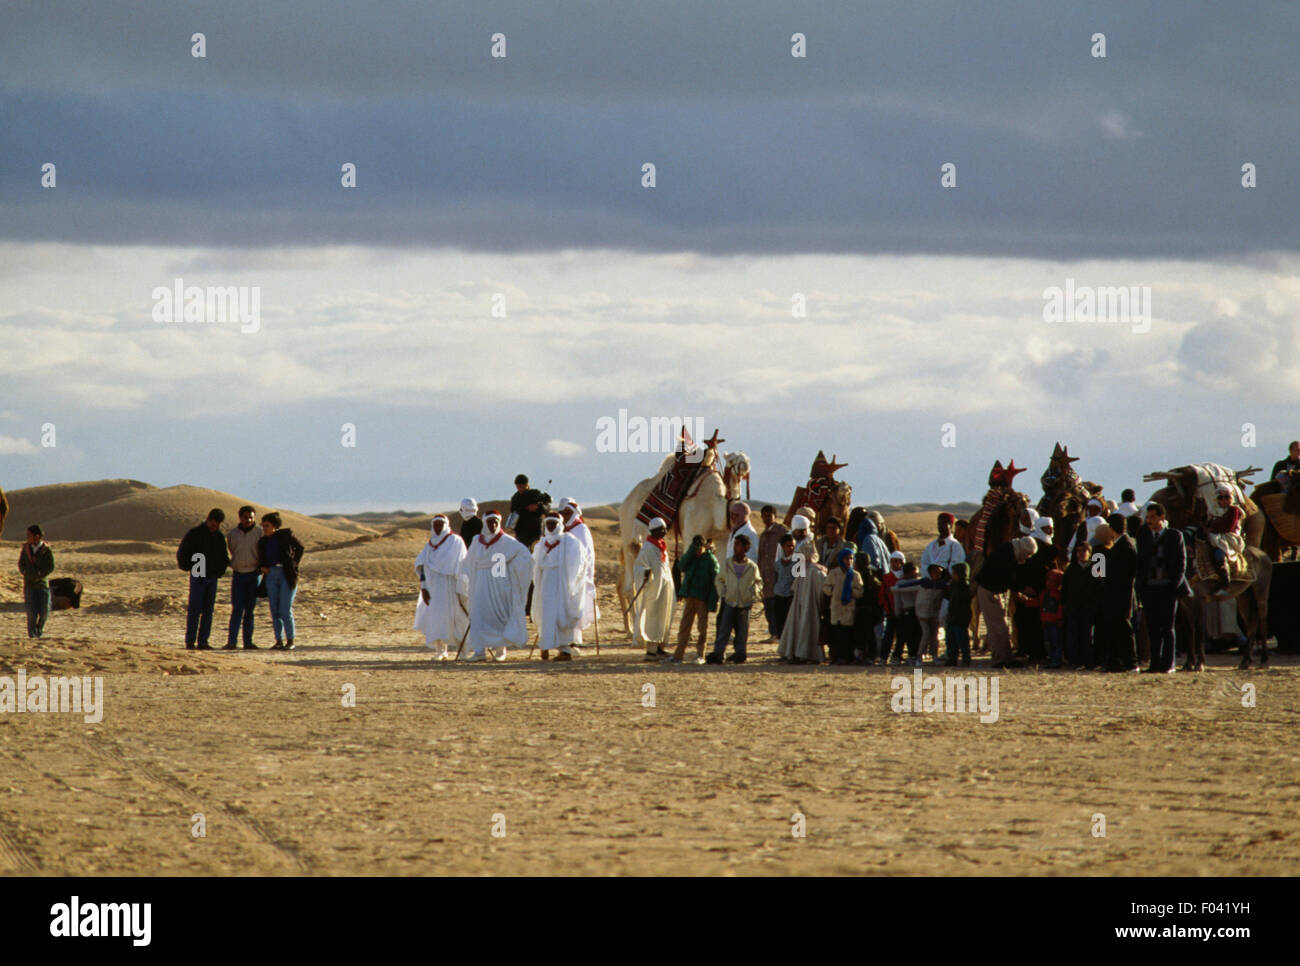 Men in traditional clothes with camels, Festival of the Sahara in Douz, Tunisia. Stock Photo